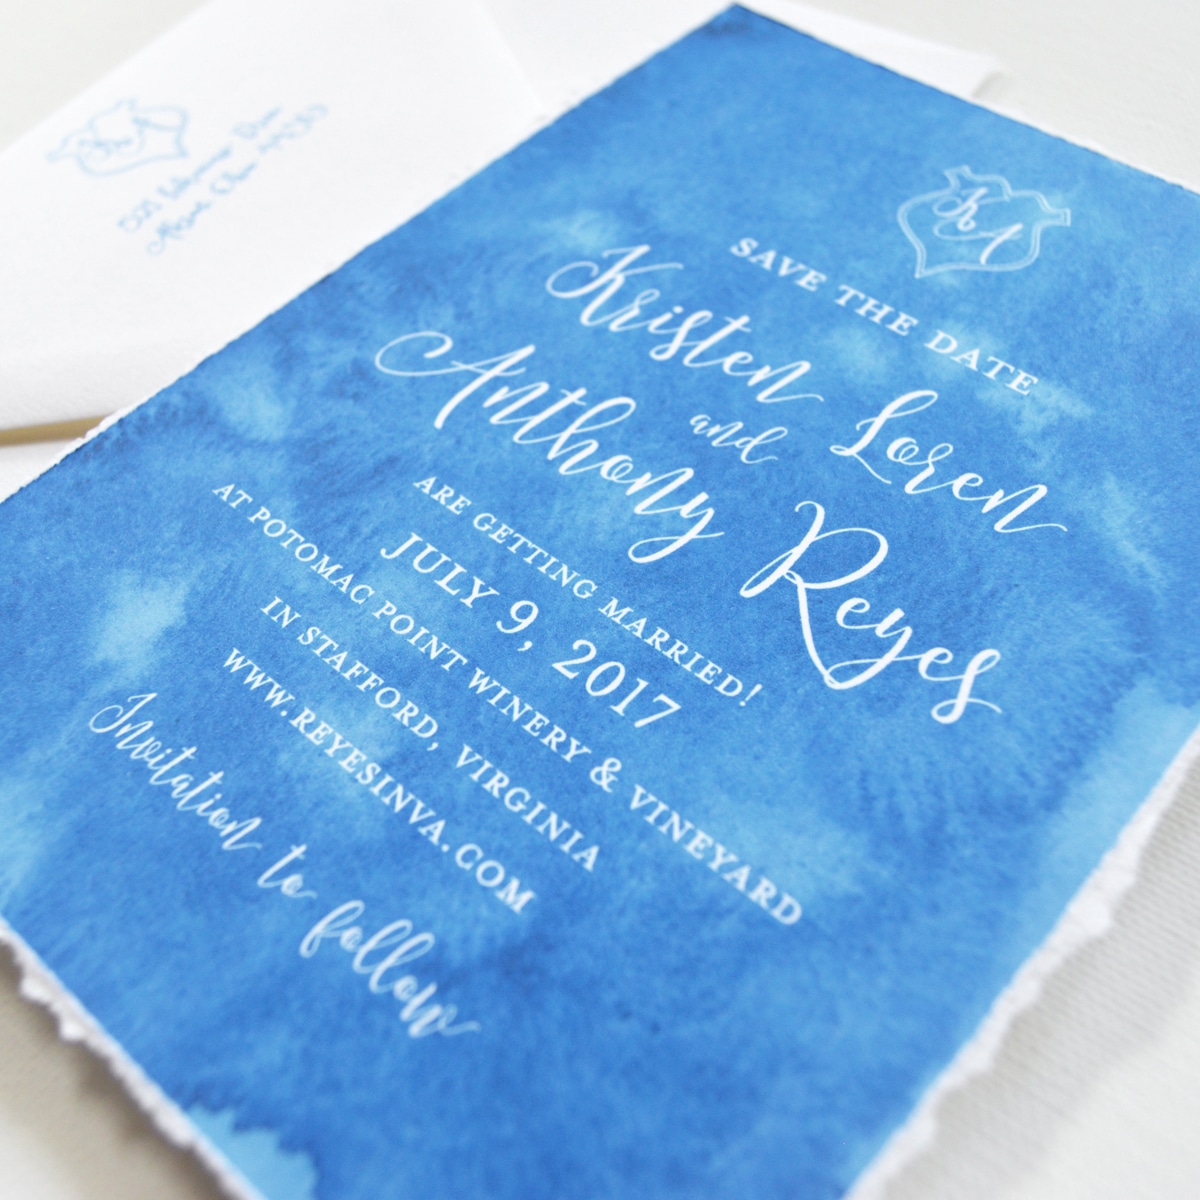 Custom save the dates with watercolor blue starlight sky by artist Michelle Mospens. www.mospensstudio.com